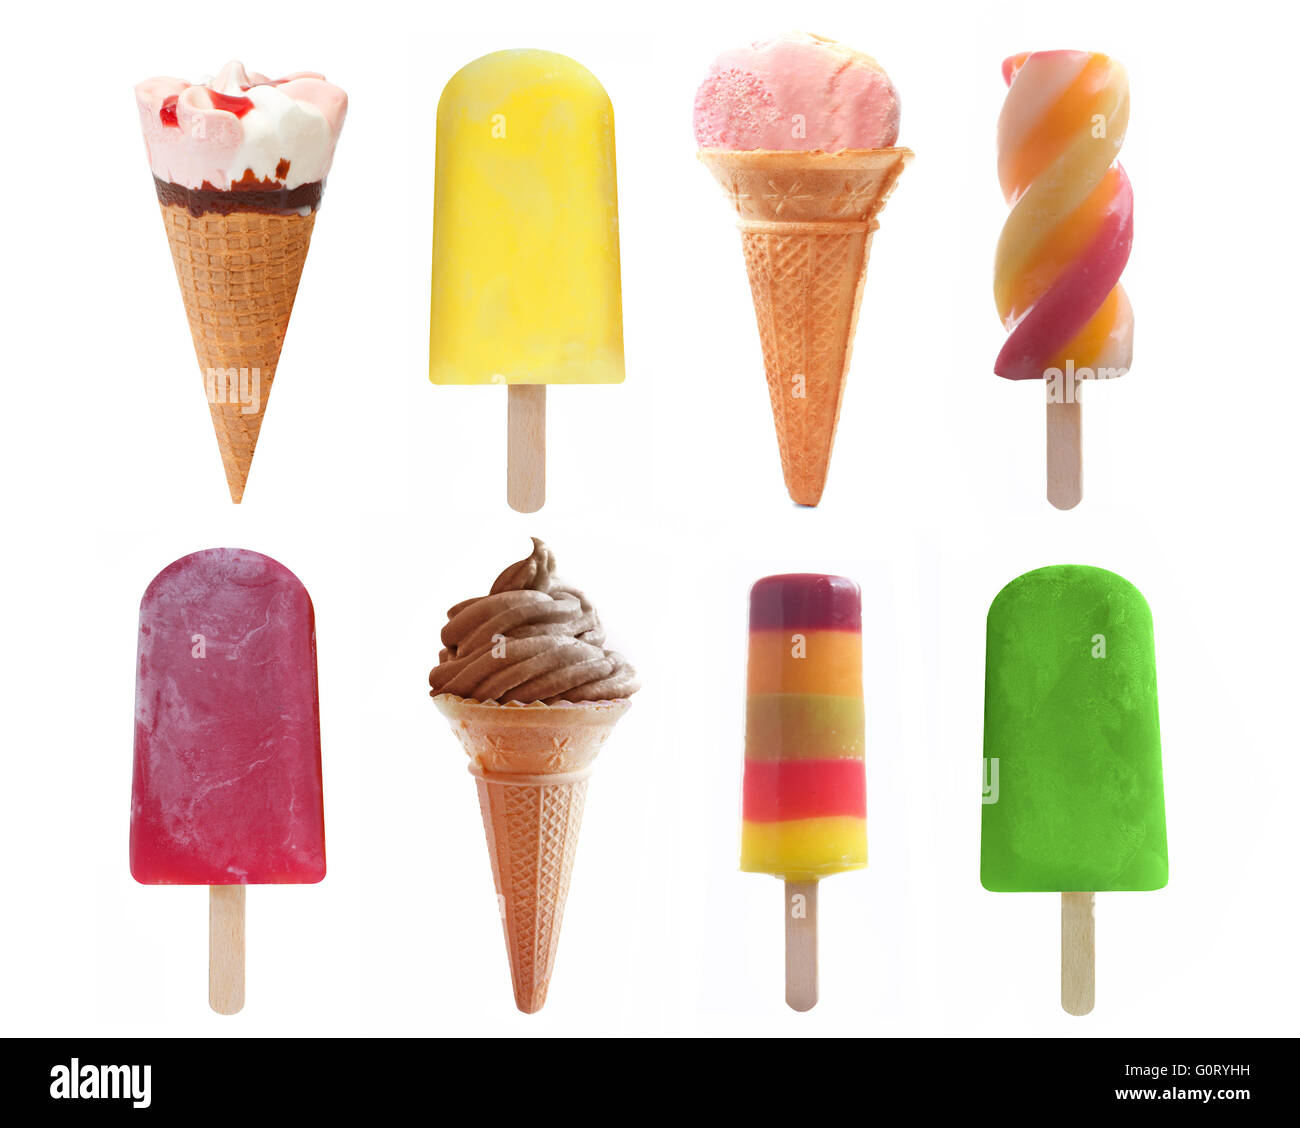 Selection of ice cream, ice lollies and popsicle flavors as a selection over a white background Stock Photo